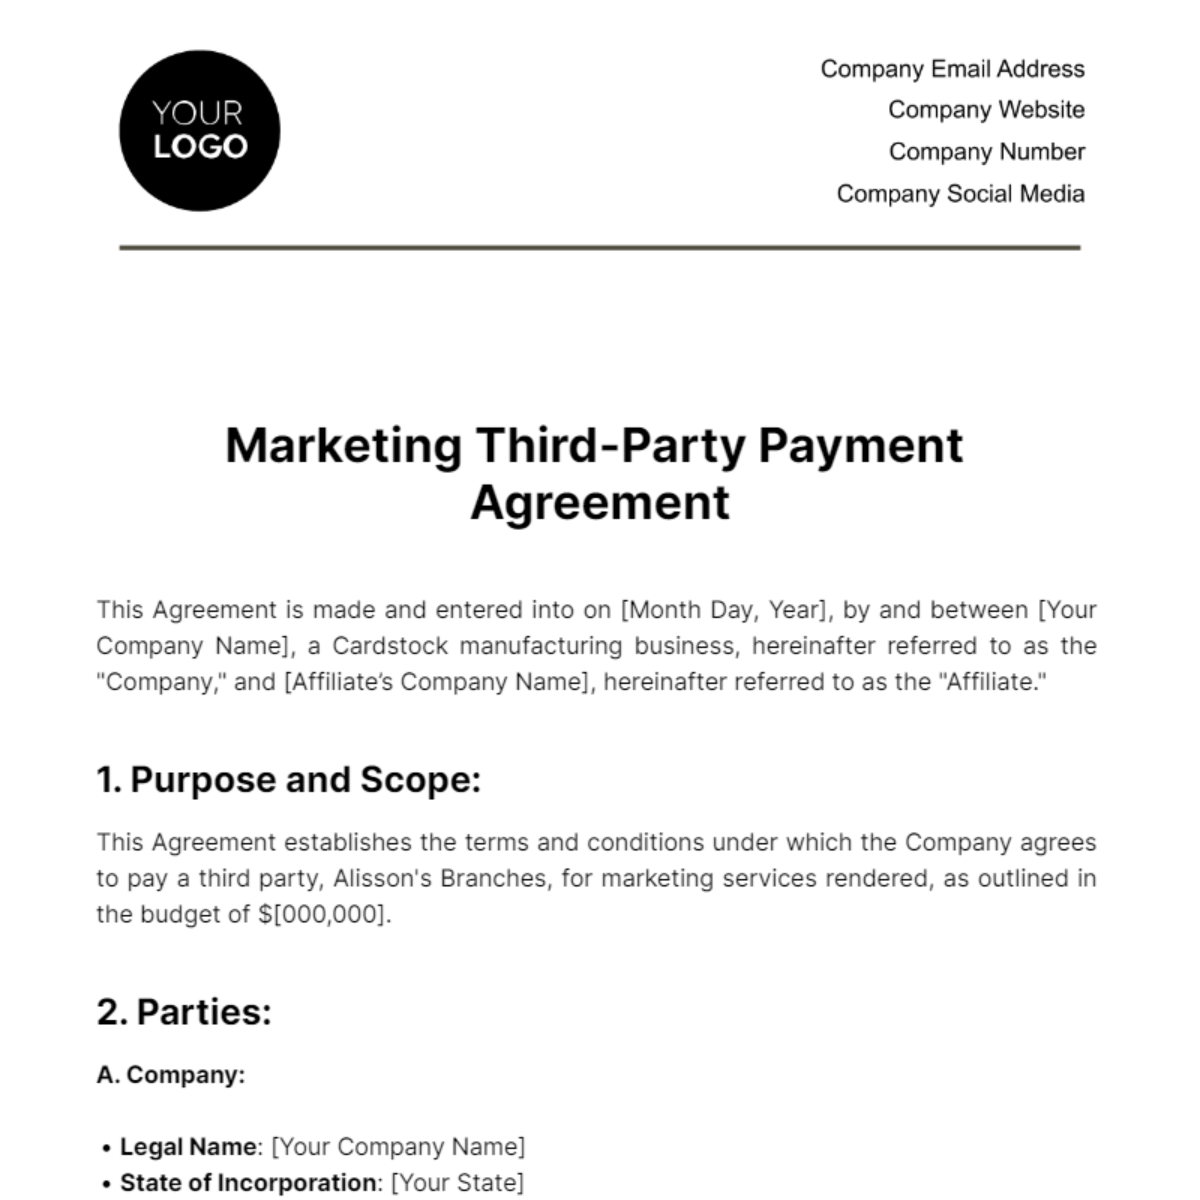 Free Marketing Third-Party Payment Agreement Template